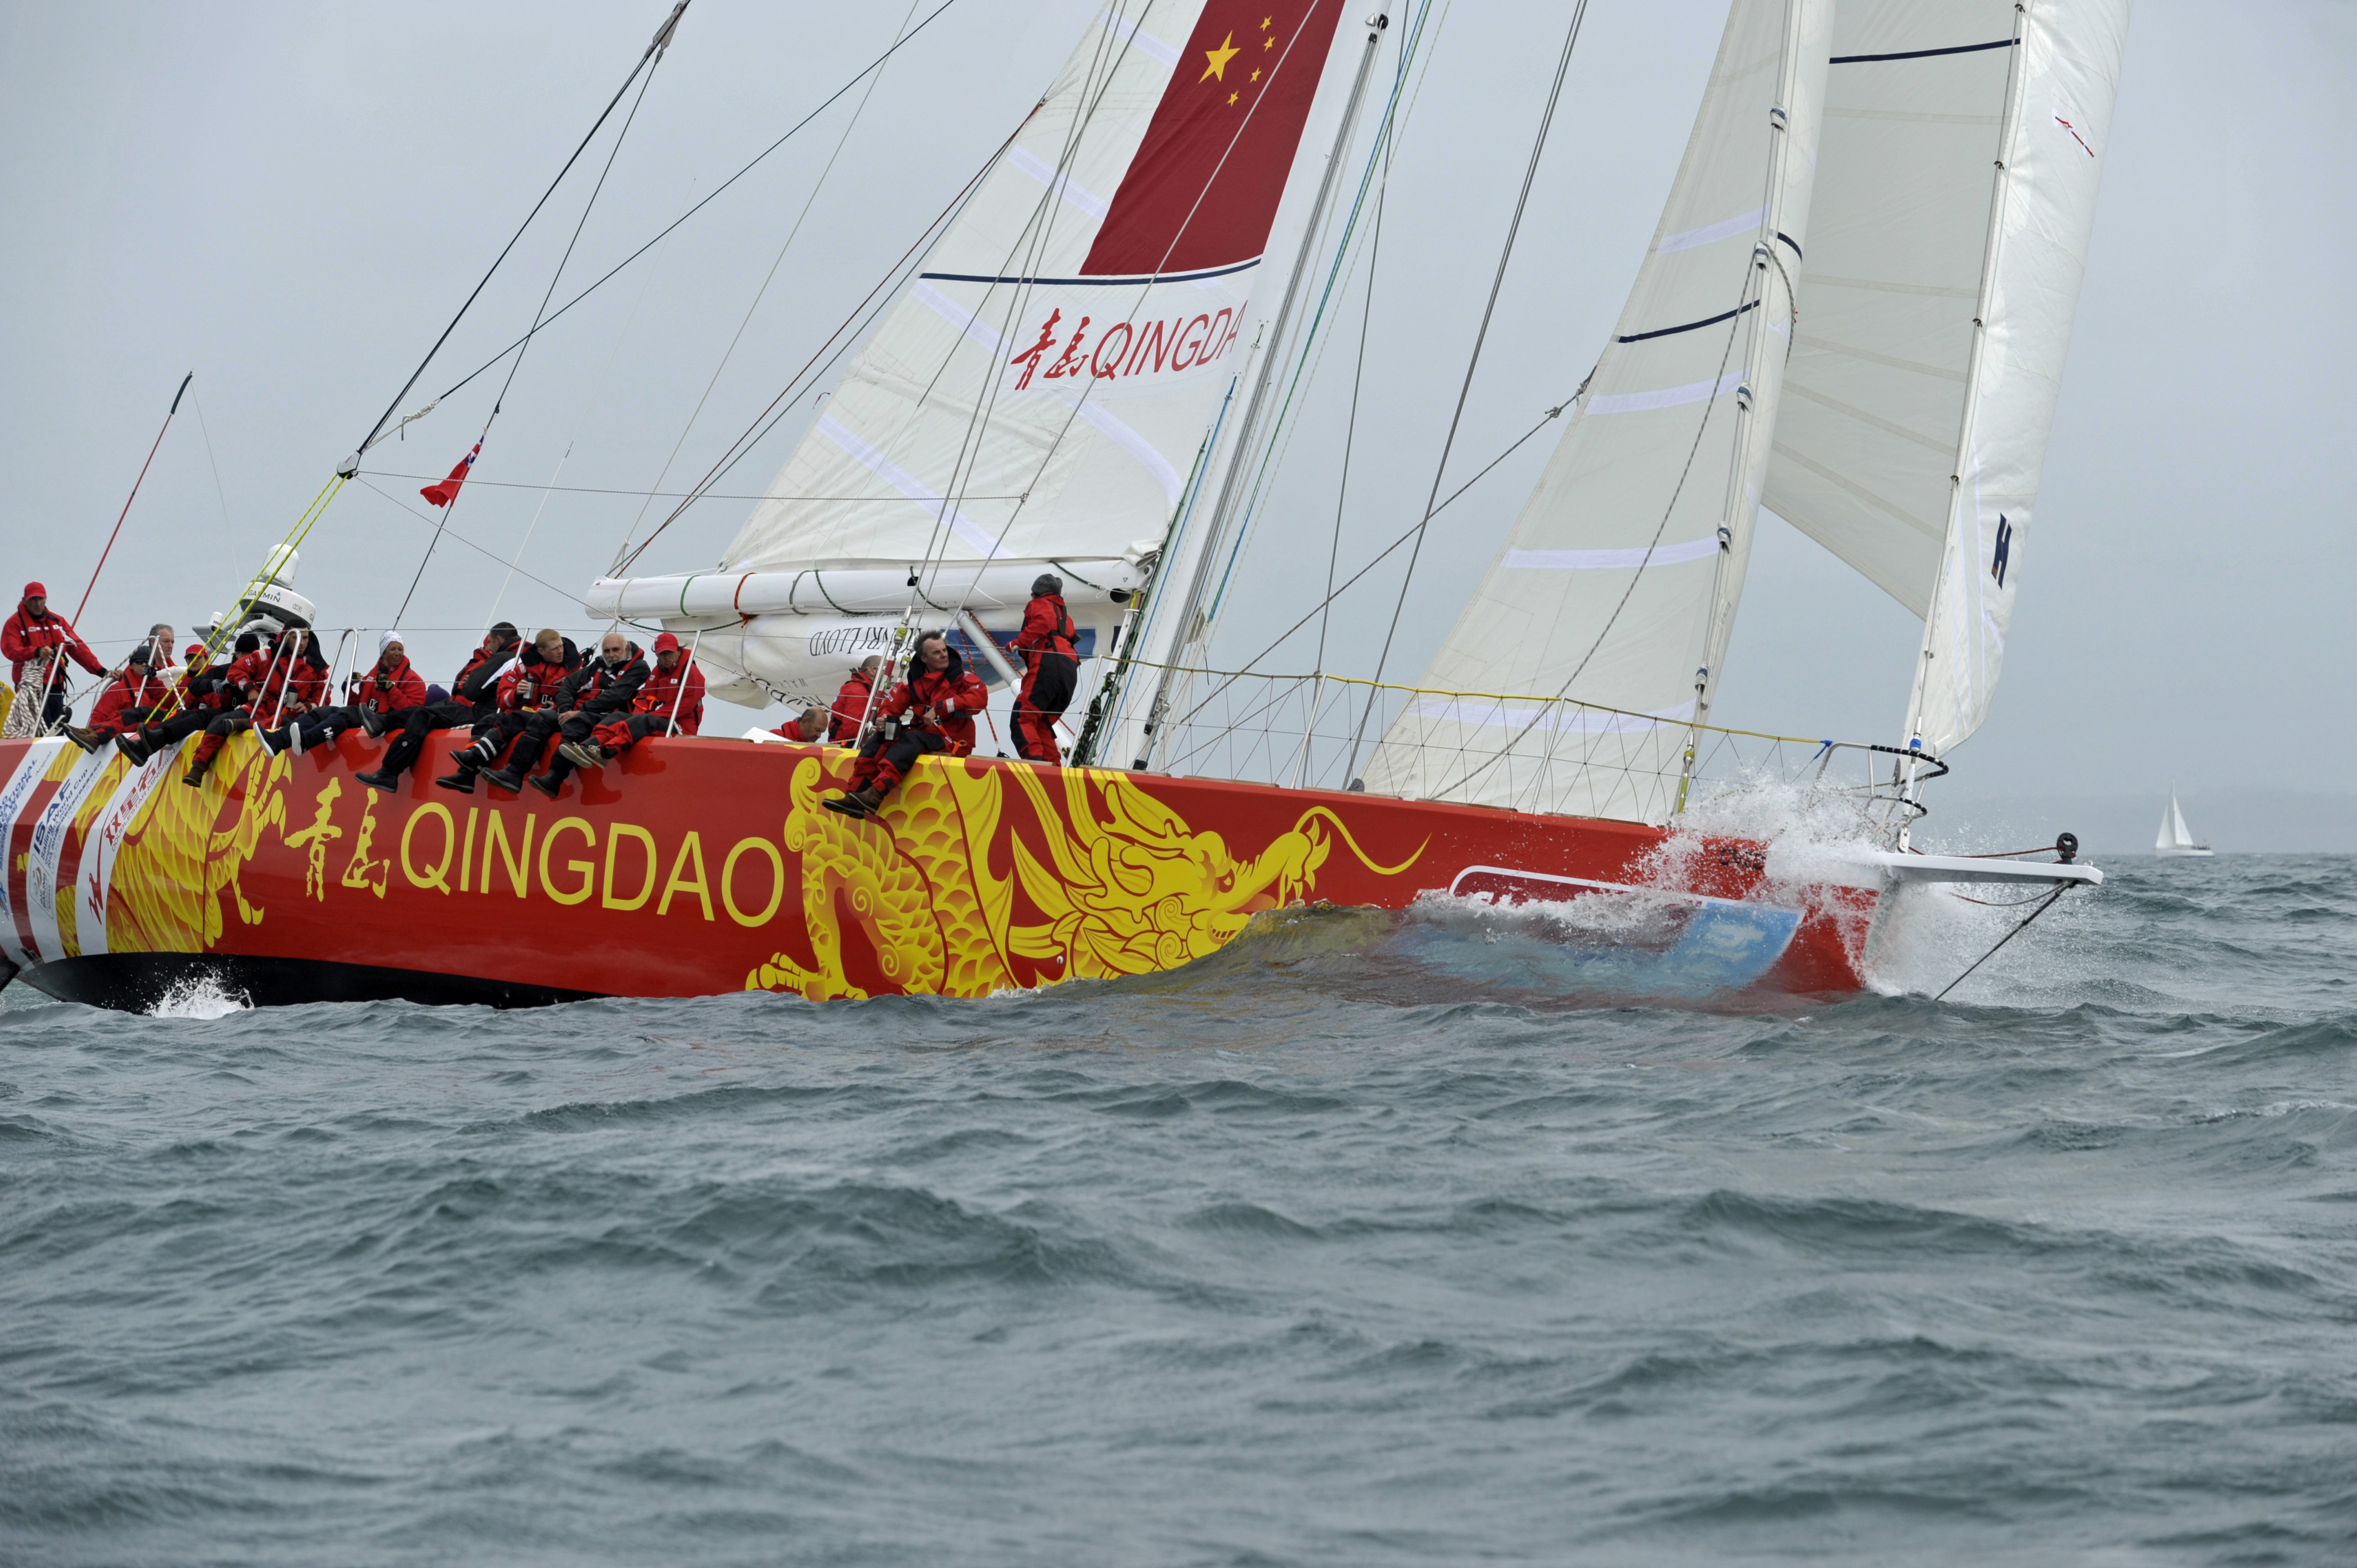 The Qingdao yacht pictured racing during the last race. 